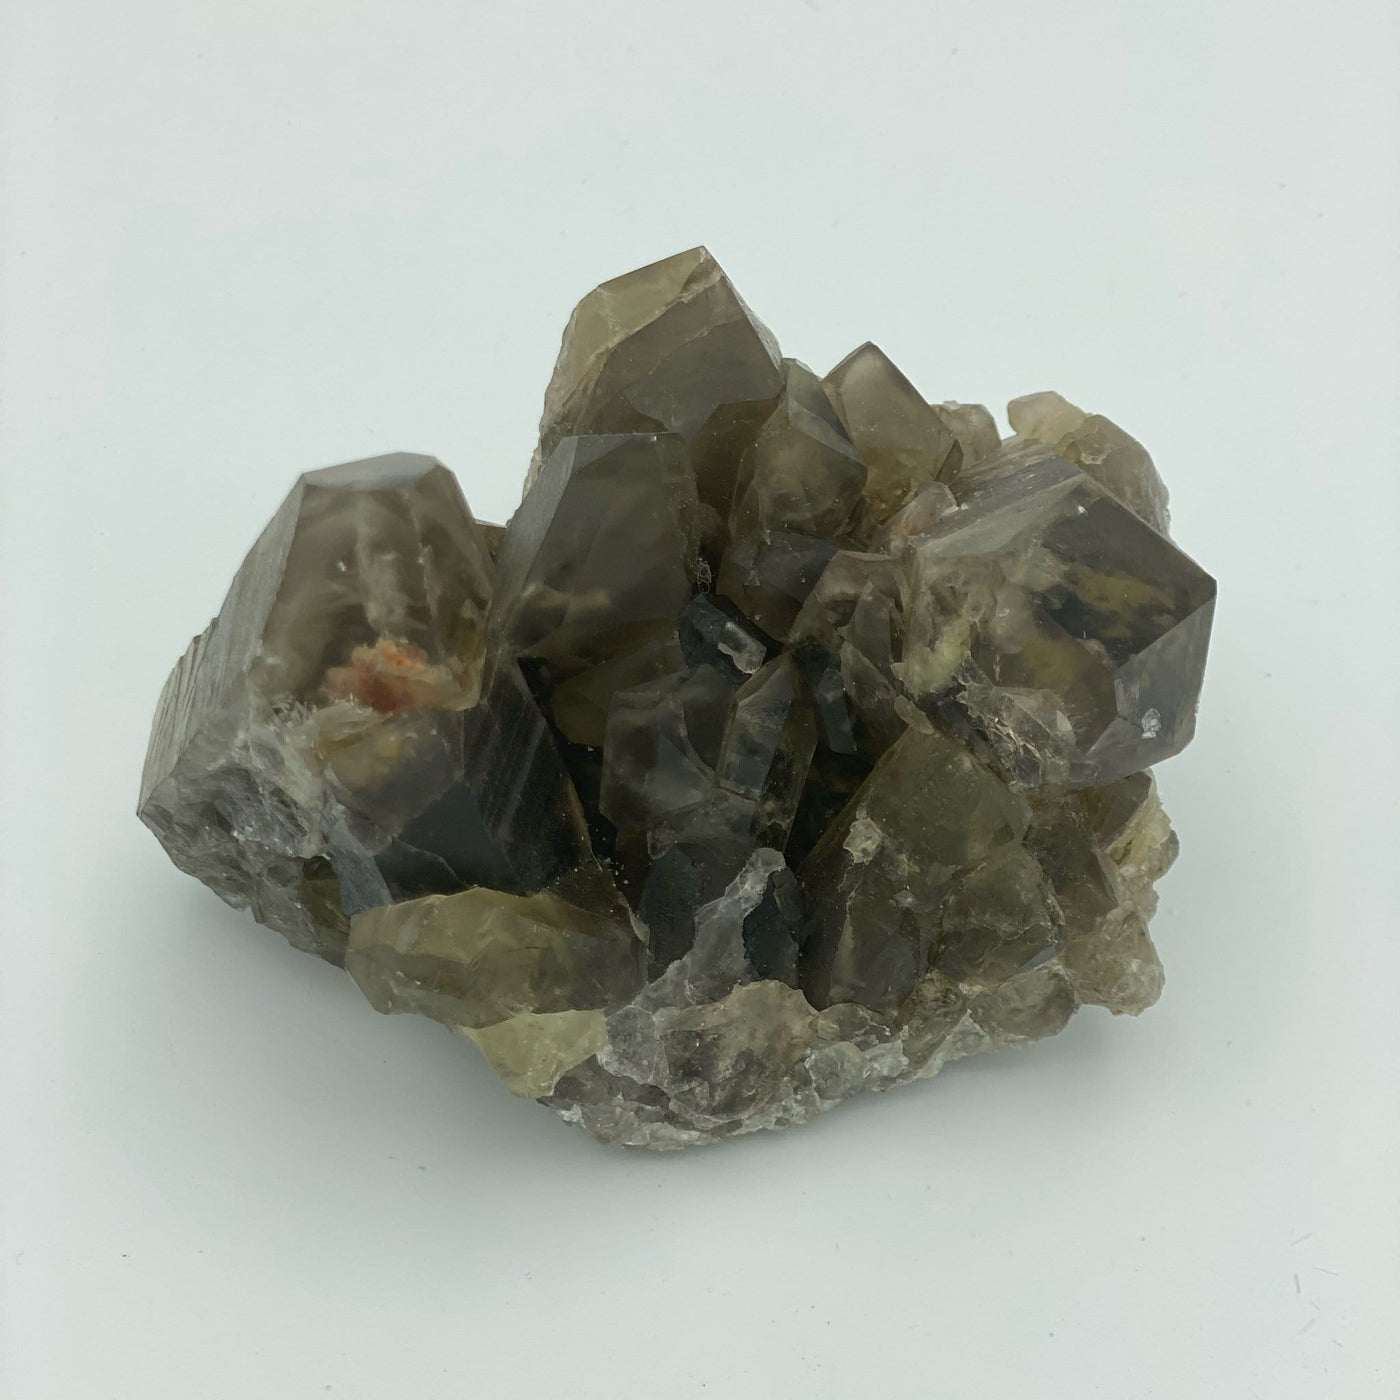 close up of natural smokey quartz cluster on white backdrop for details